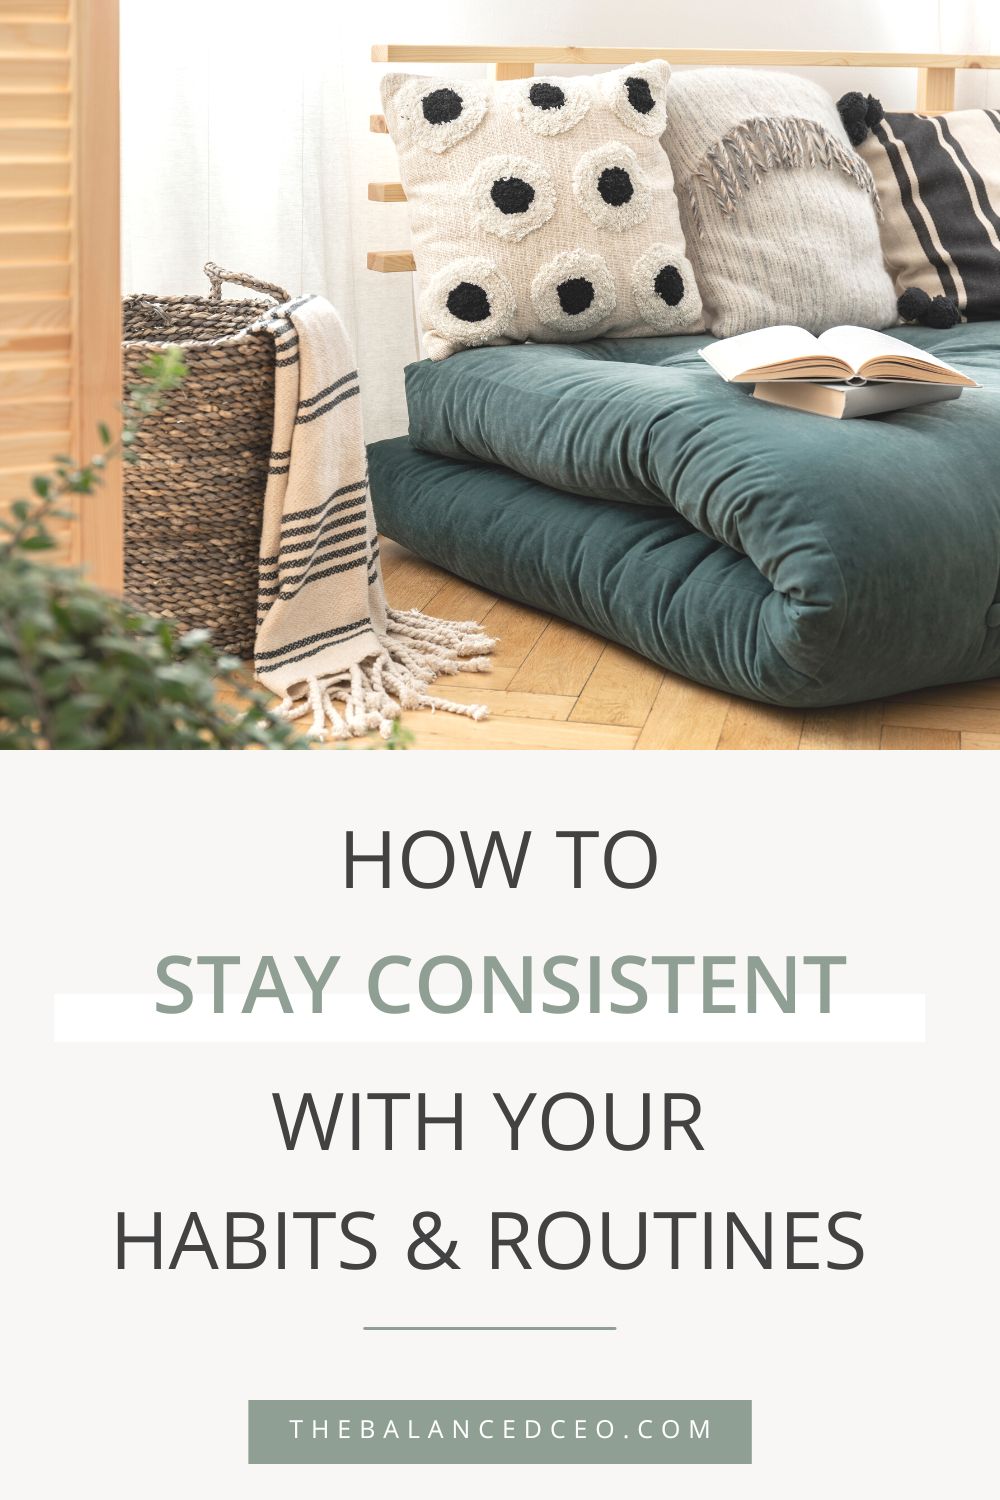 How to Stay Consistent with Your Habits and Routines